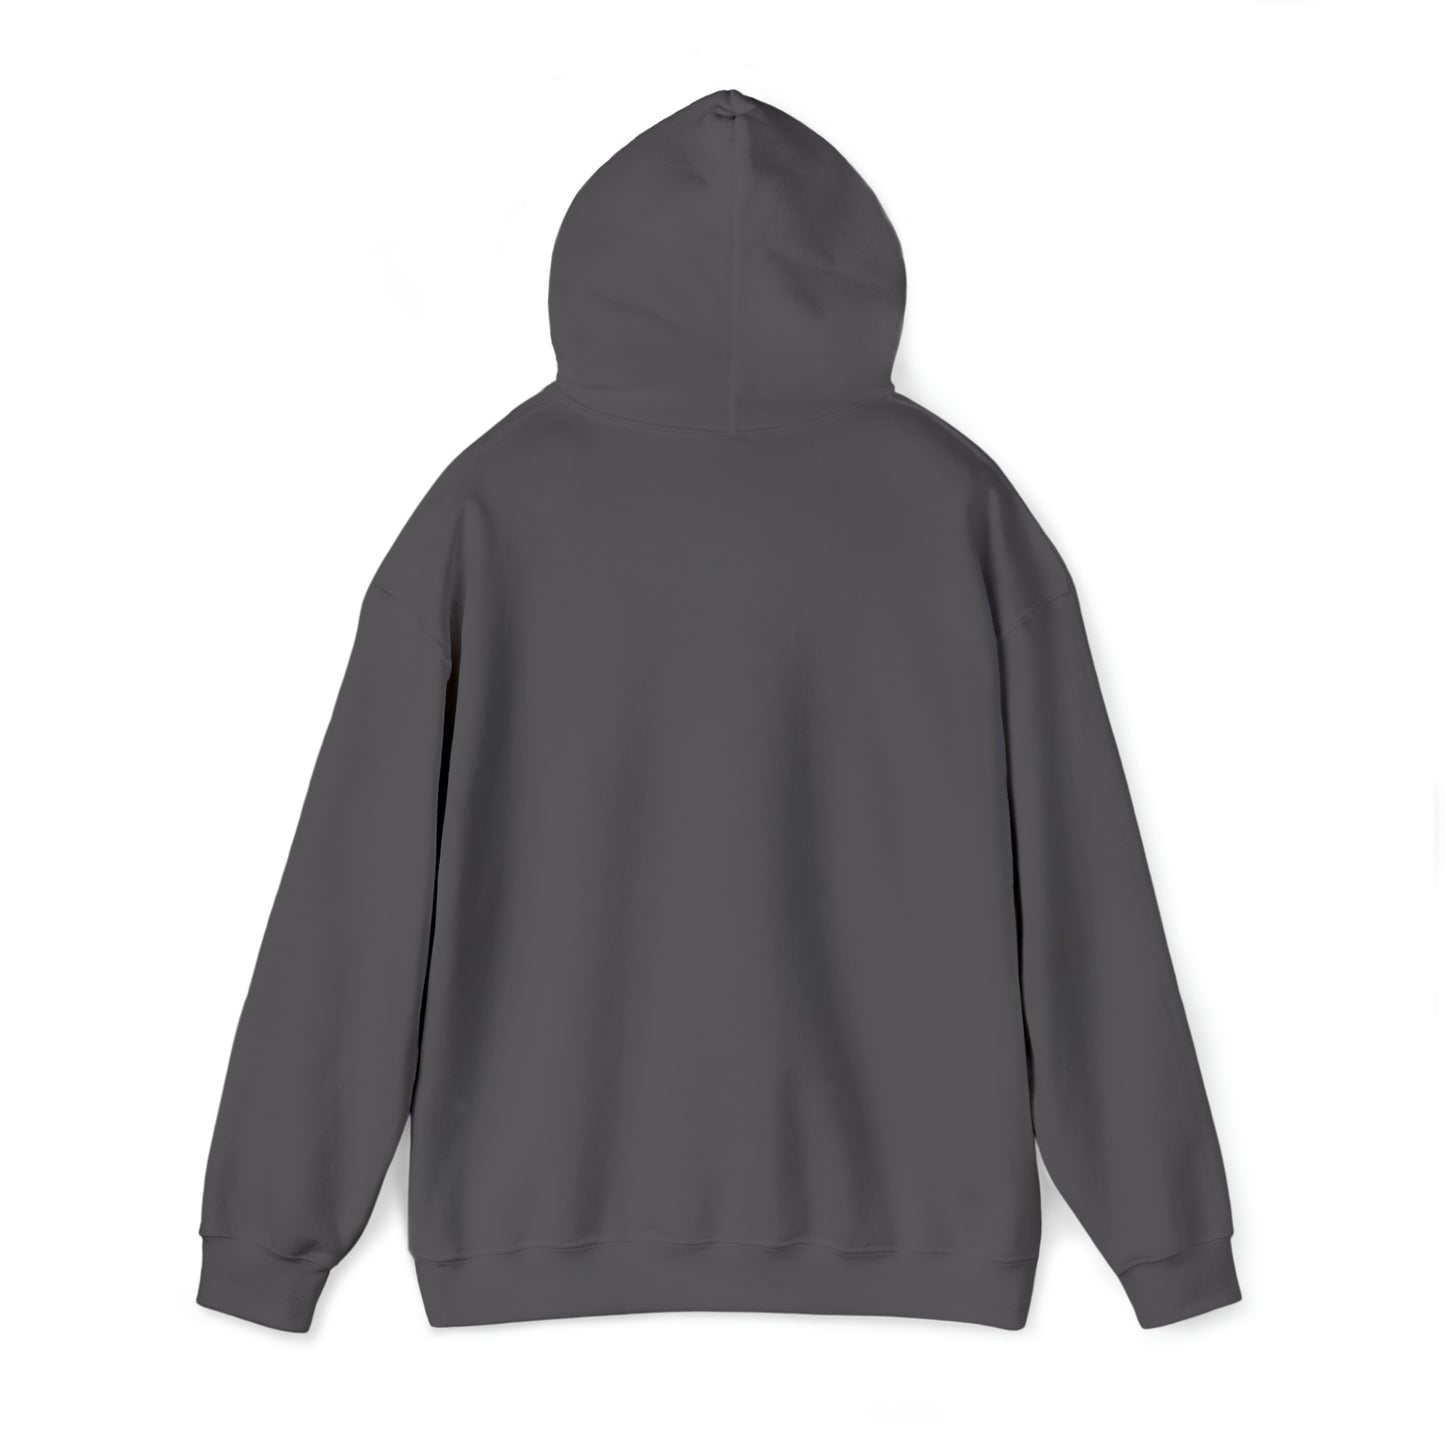 Hood up in back of Charcoal shirt